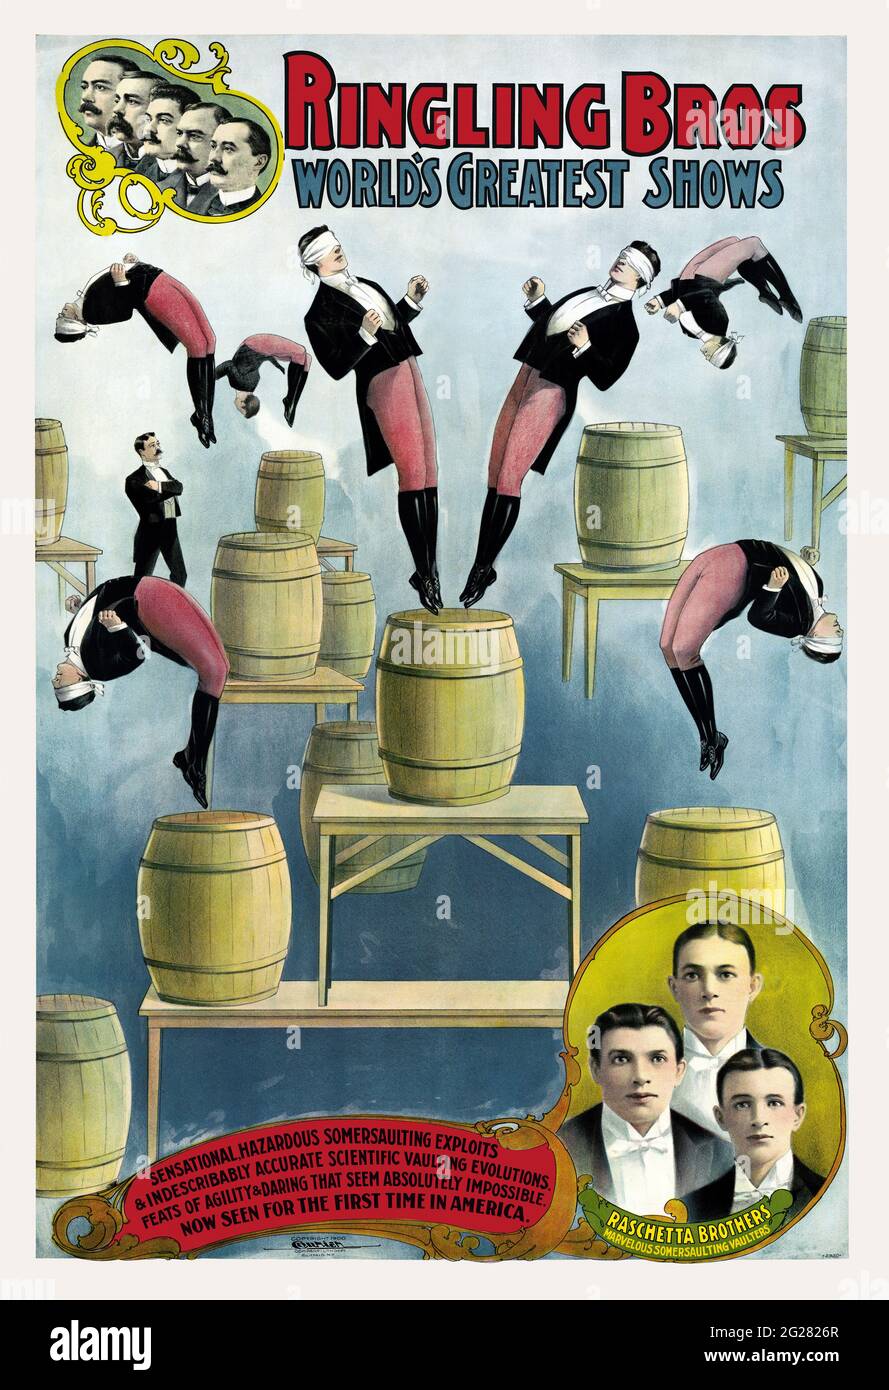 Vintage Ringling Bros. circus poster showing the Raschetta brothers and somersaulting vaulters. Stock Photo